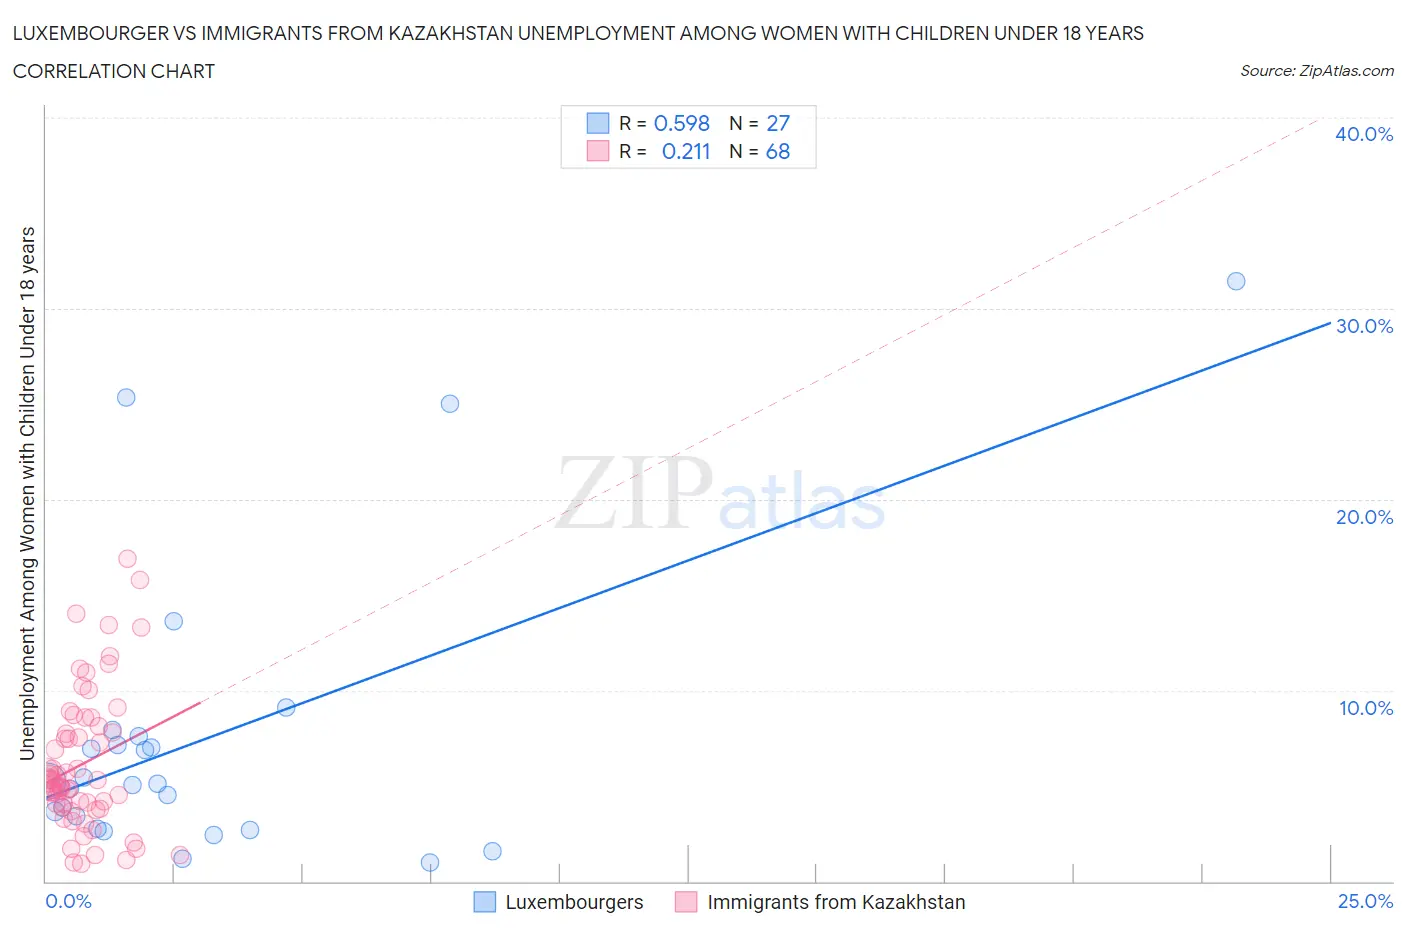 Luxembourger vs Immigrants from Kazakhstan Unemployment Among Women with Children Under 18 years